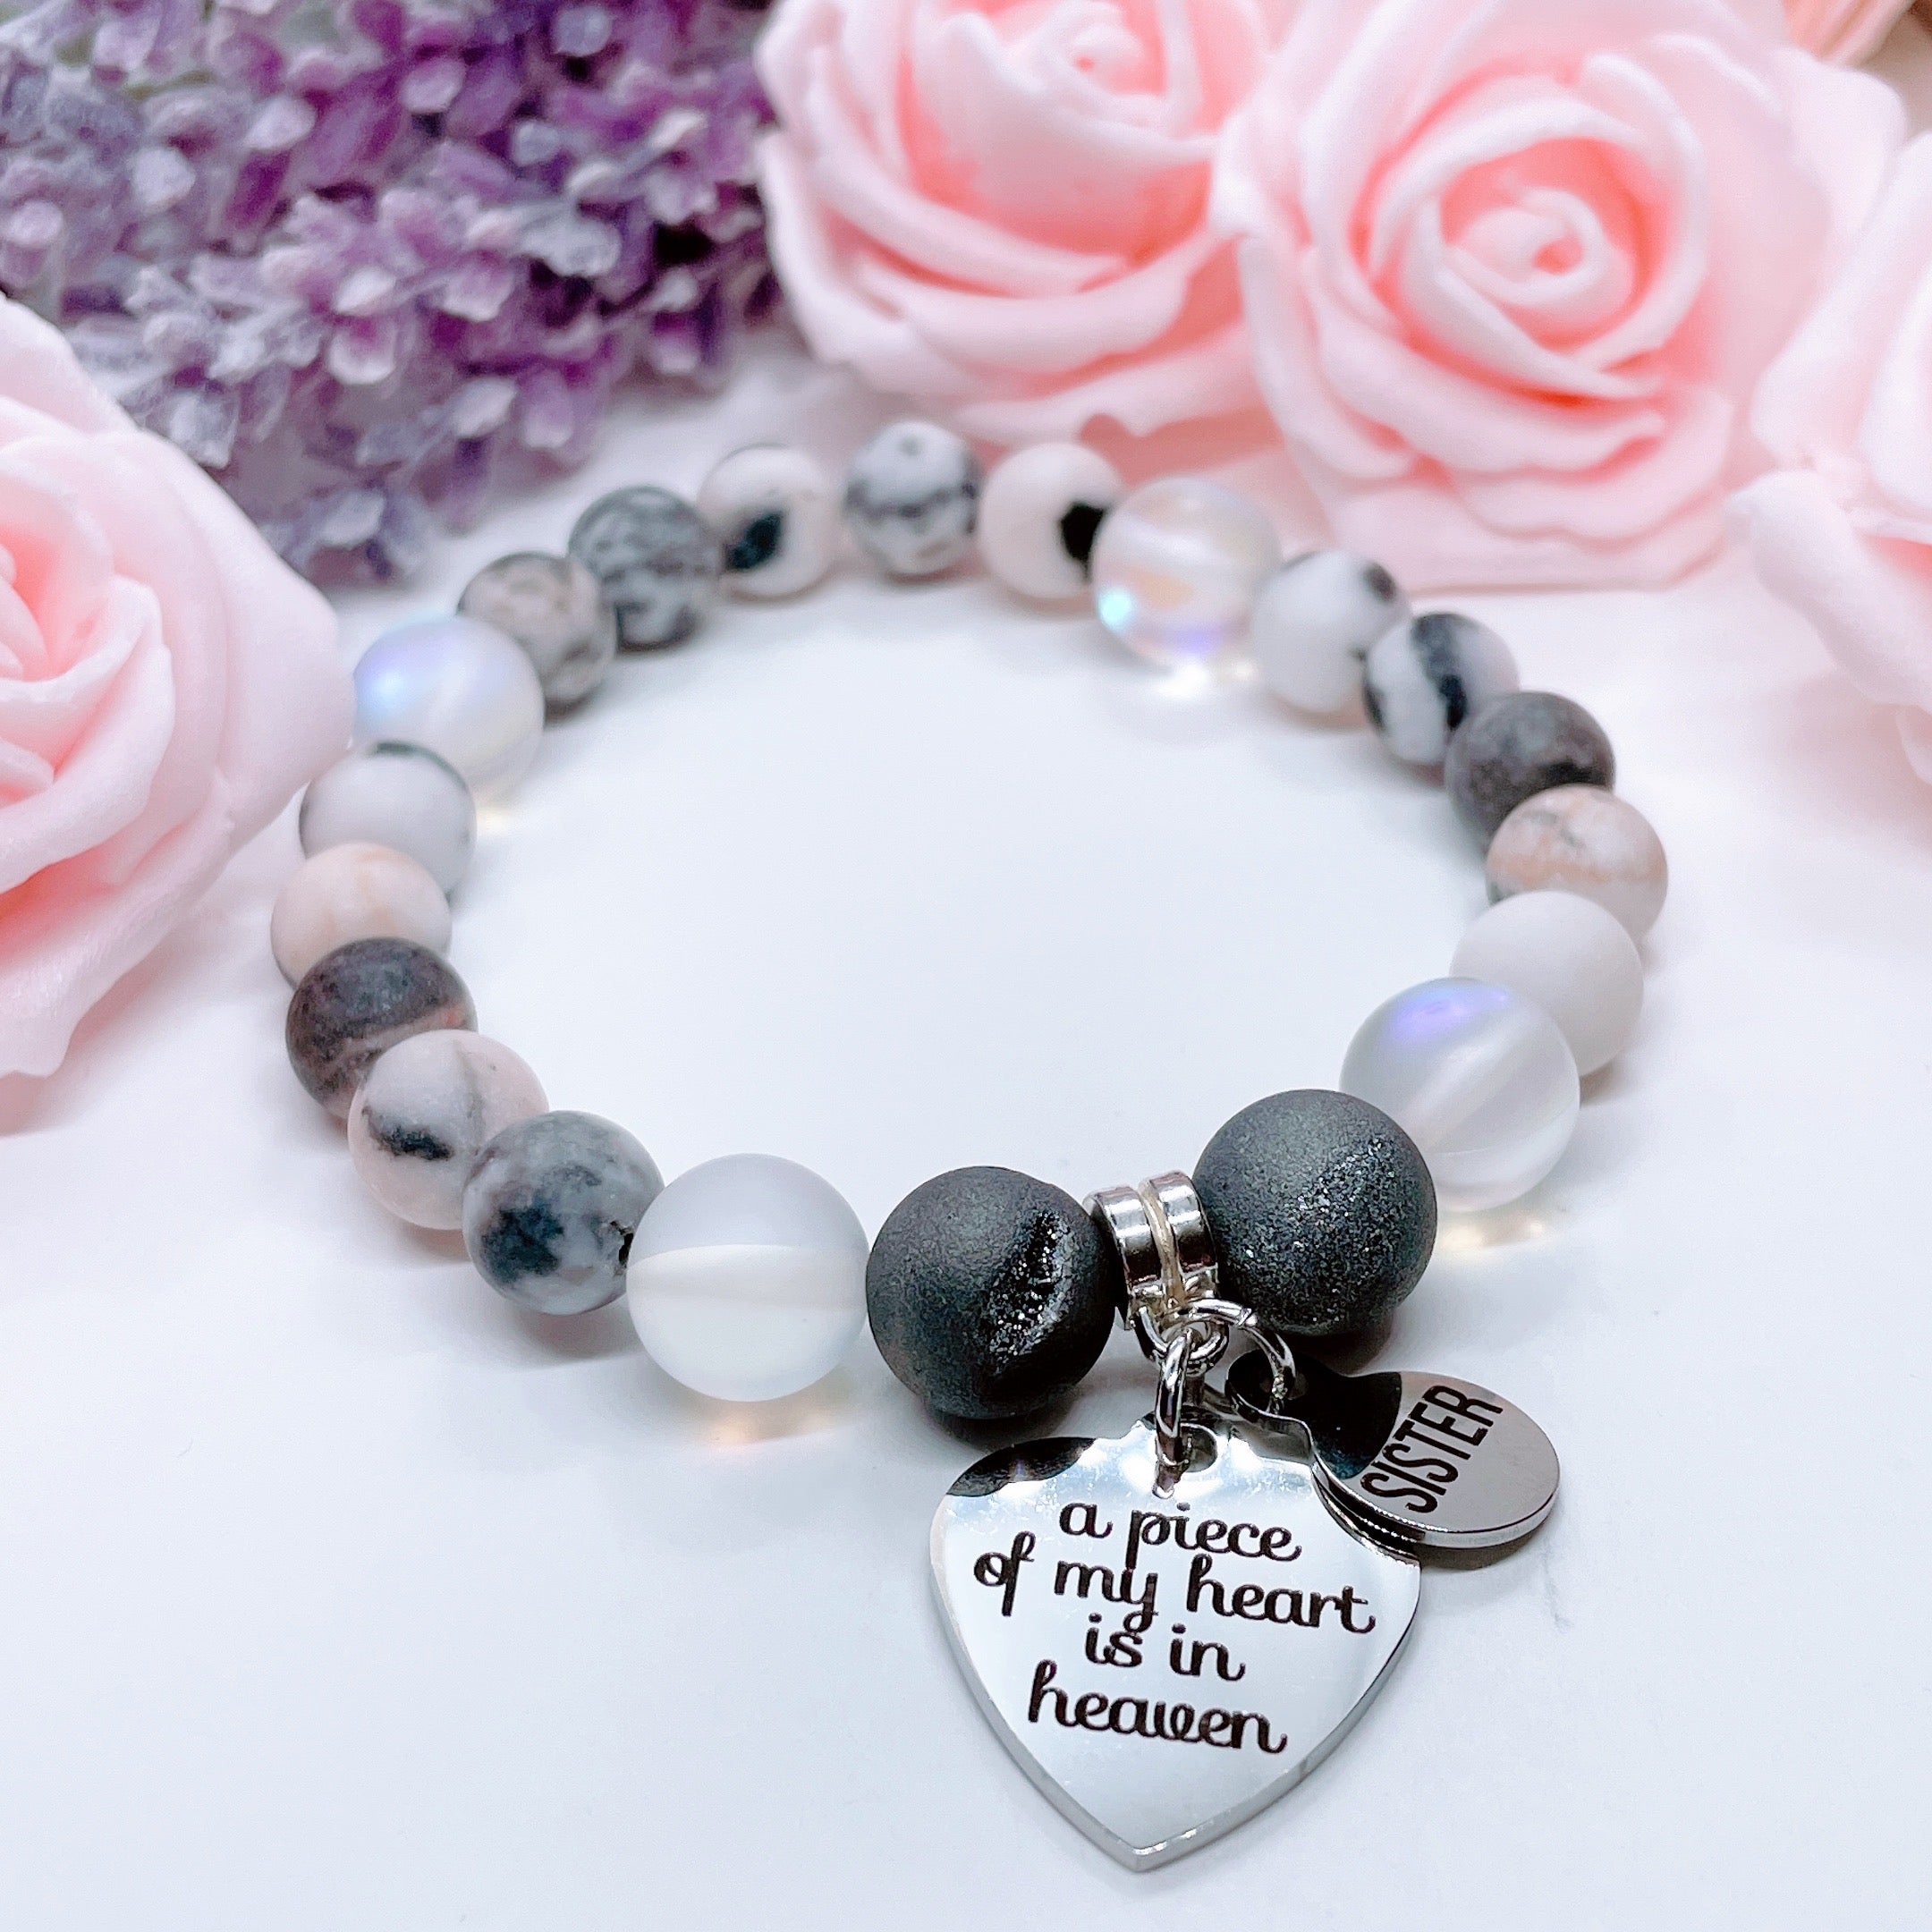 Sister: A Piece of my Heart is in Heaven Classic 5 Second Rule Charm Bracelet